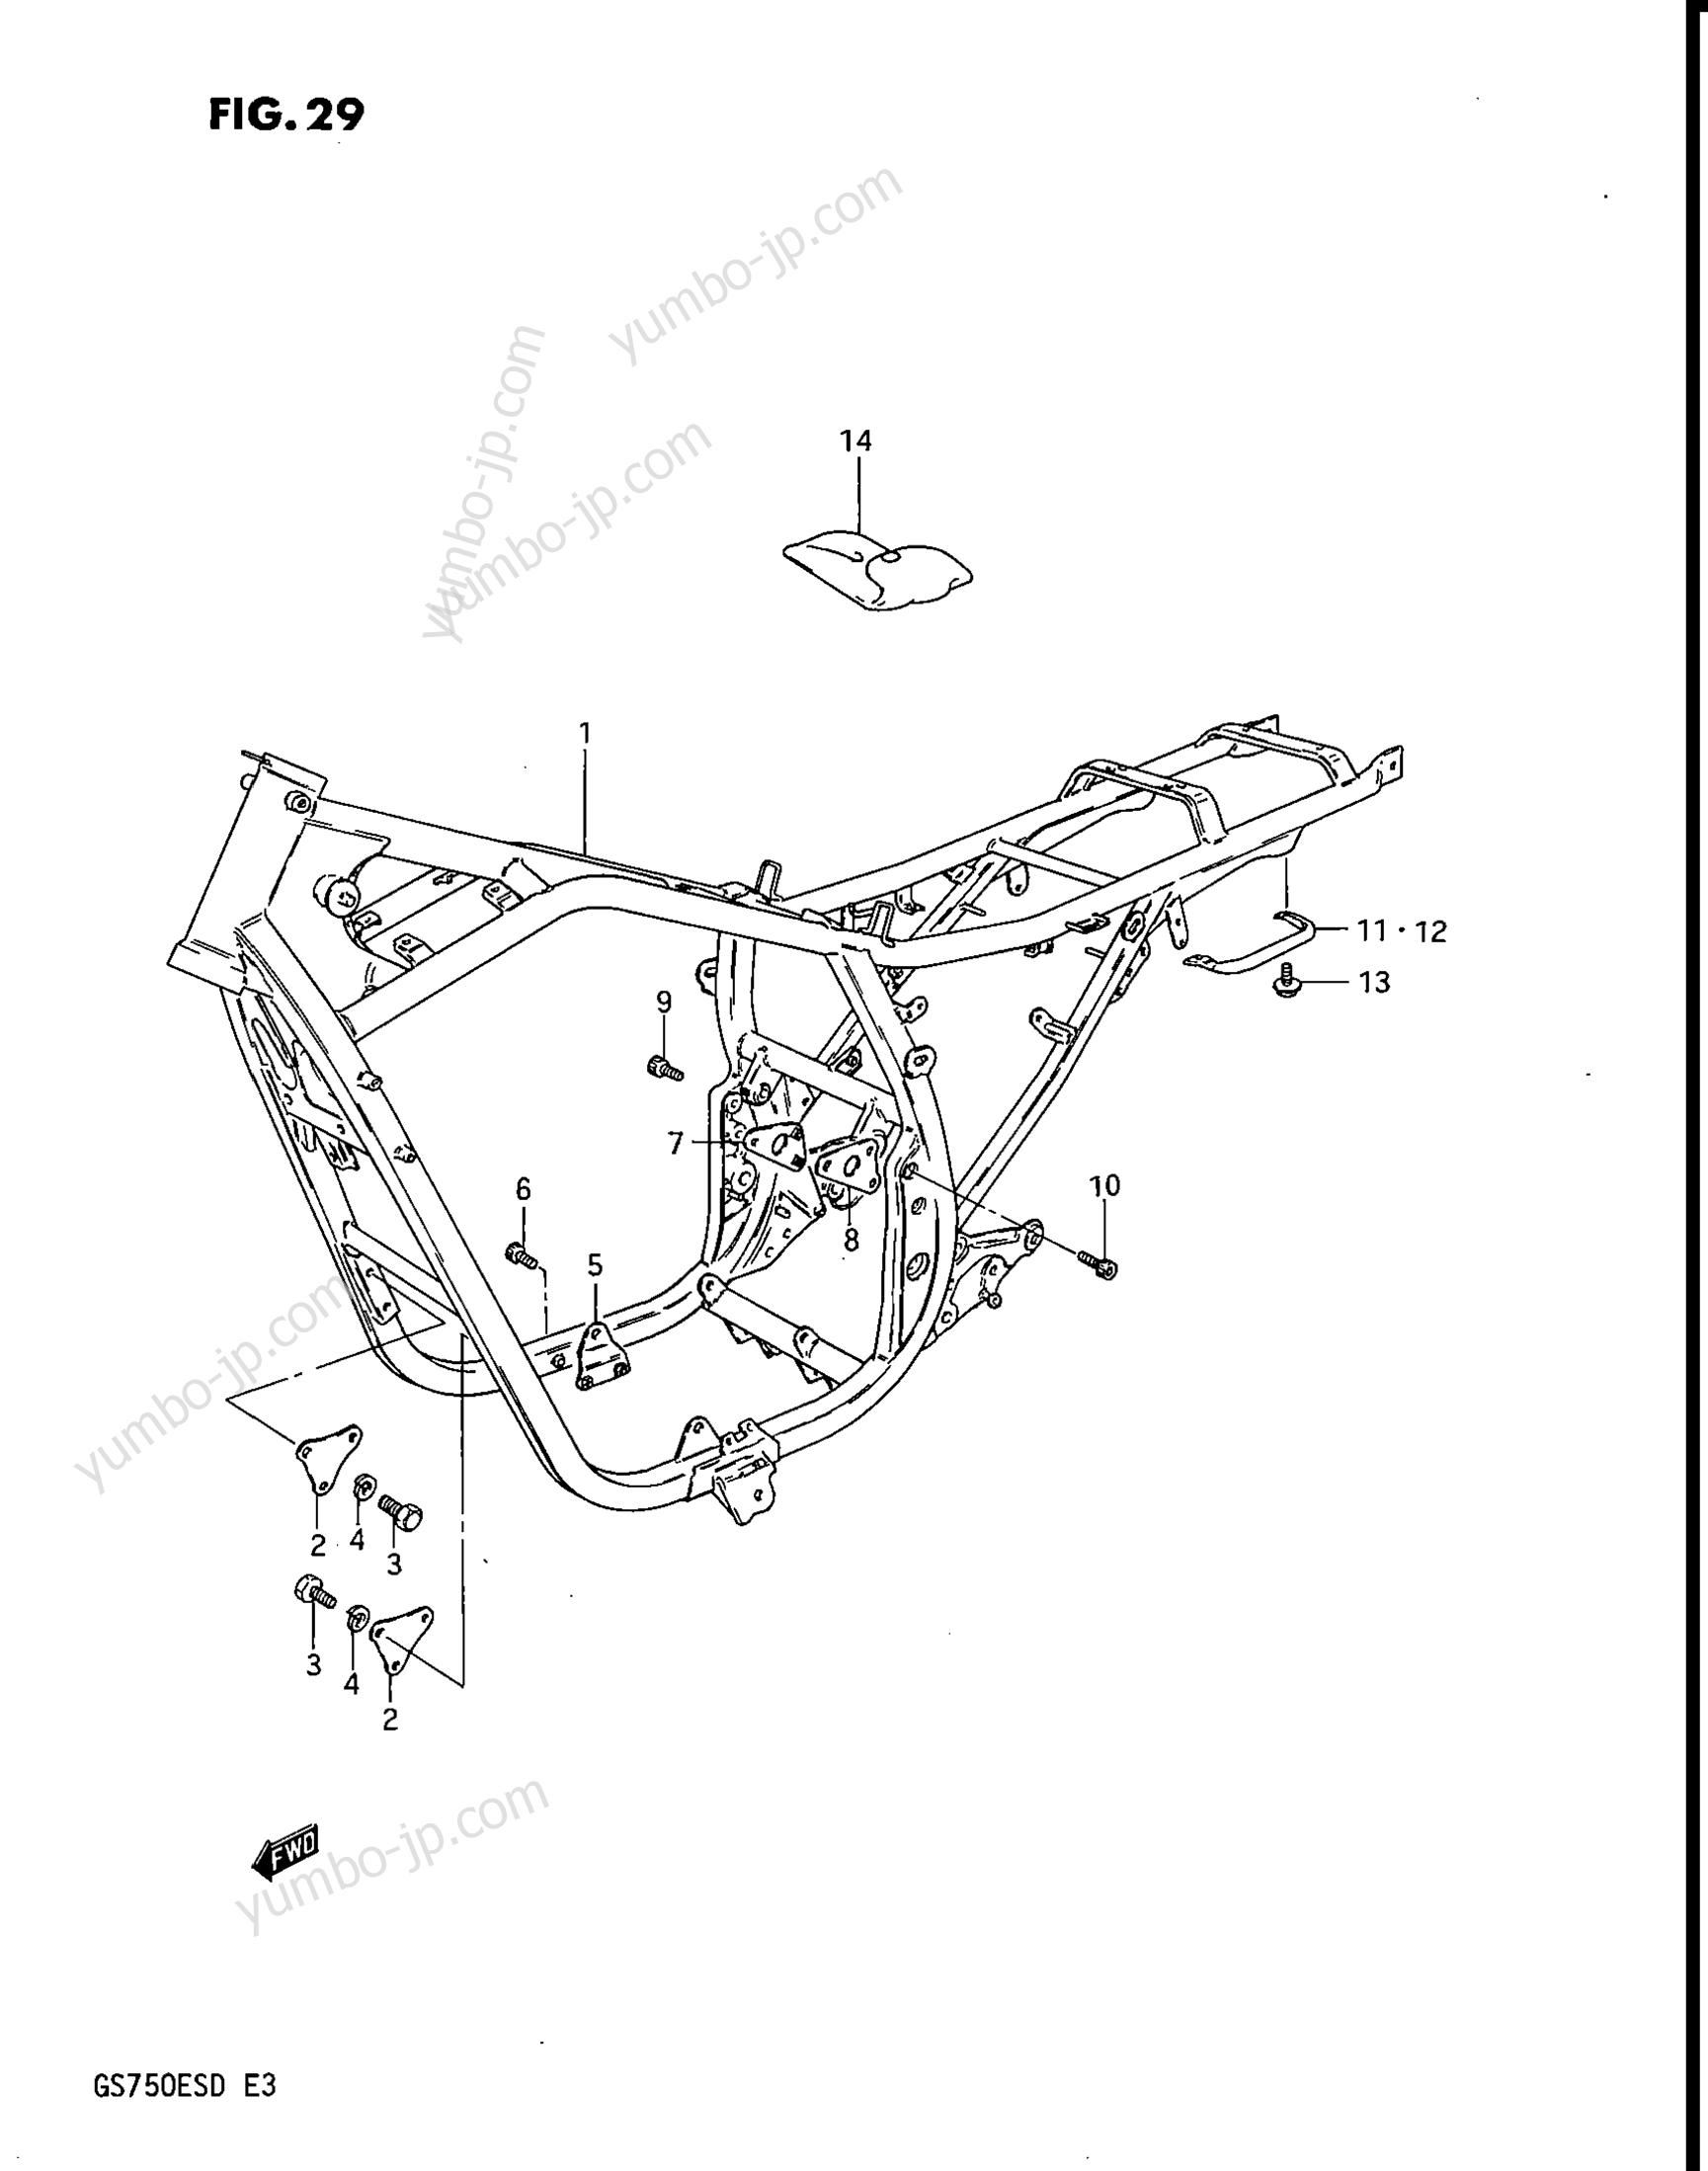 FRAME for motorcycles SUZUKI GS750E 1983 year